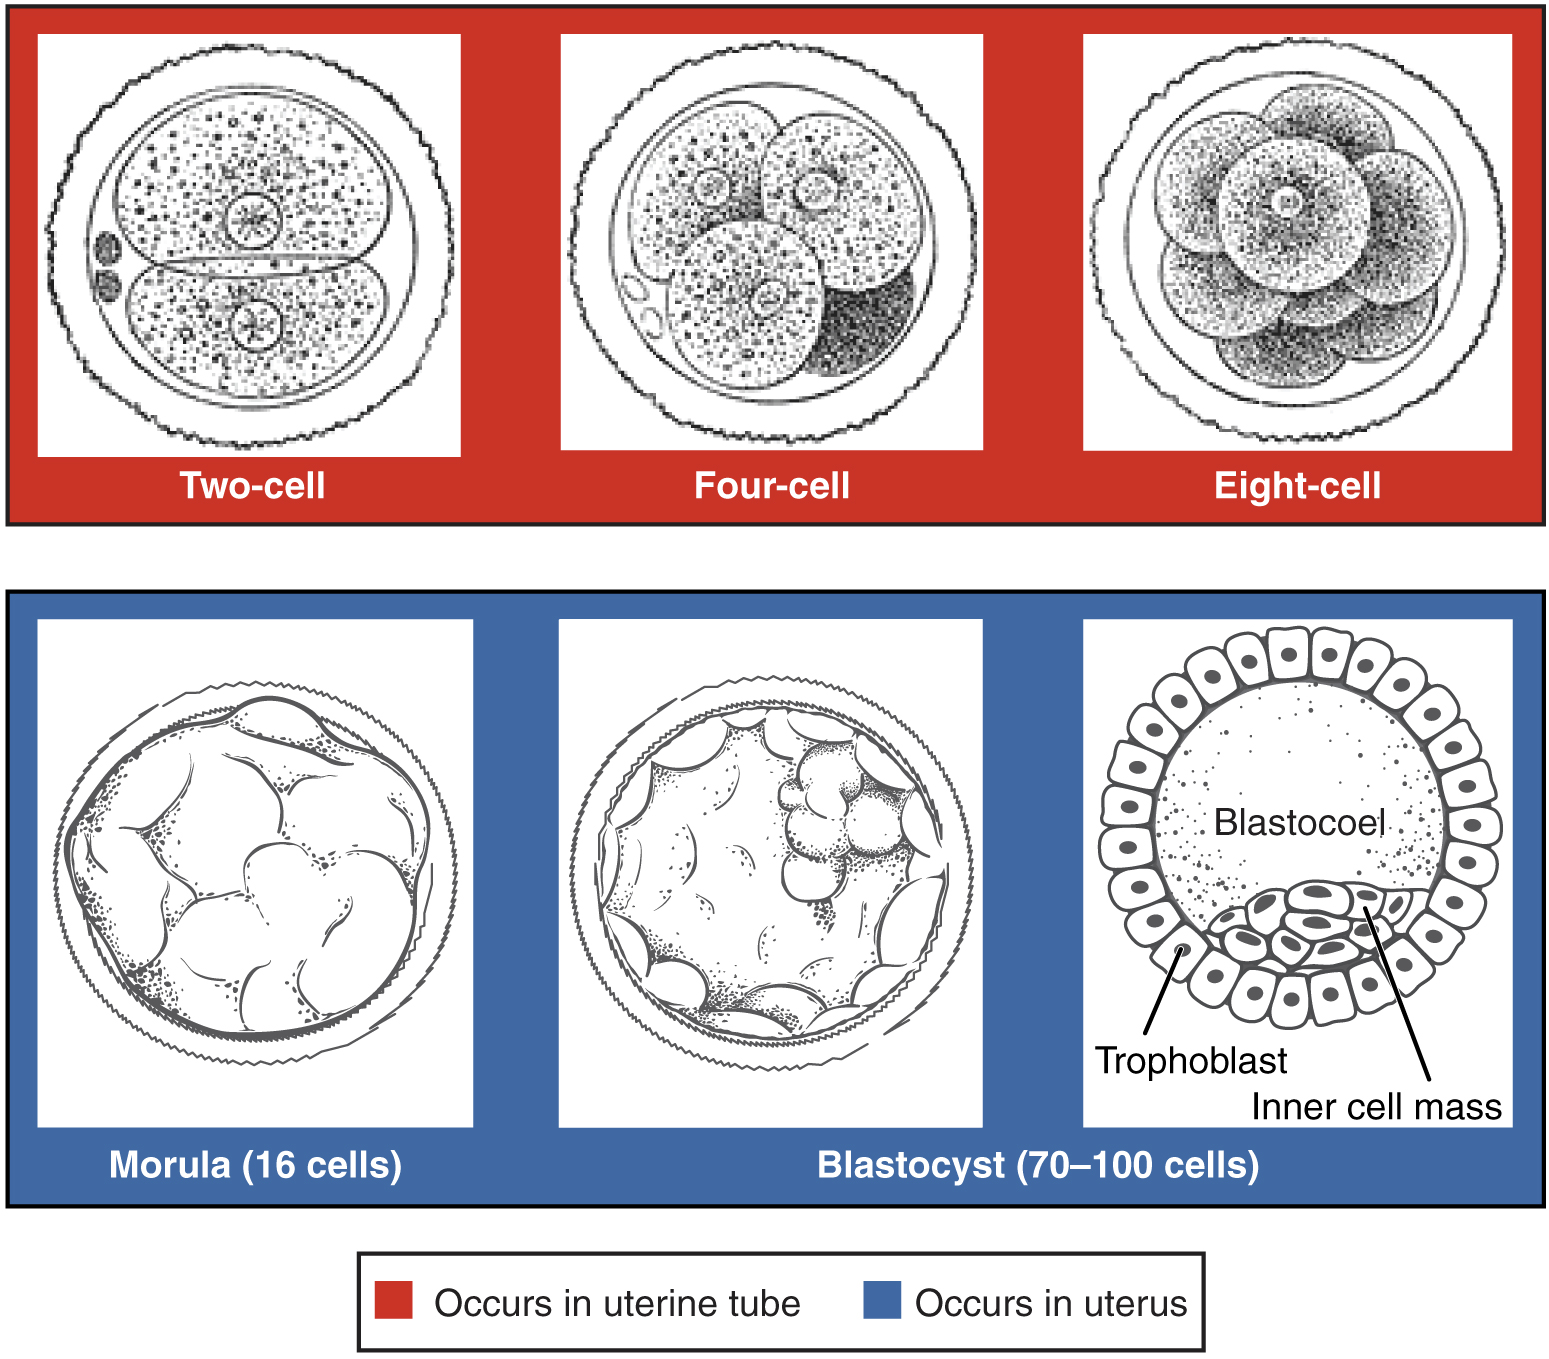 This figure shows the different stages of cell divisions taking place before the embryo is formed. The top panel shows the cell divisions occurring in the uterine tube and the bottom panel shows the cell divisions occurring in the uterus.